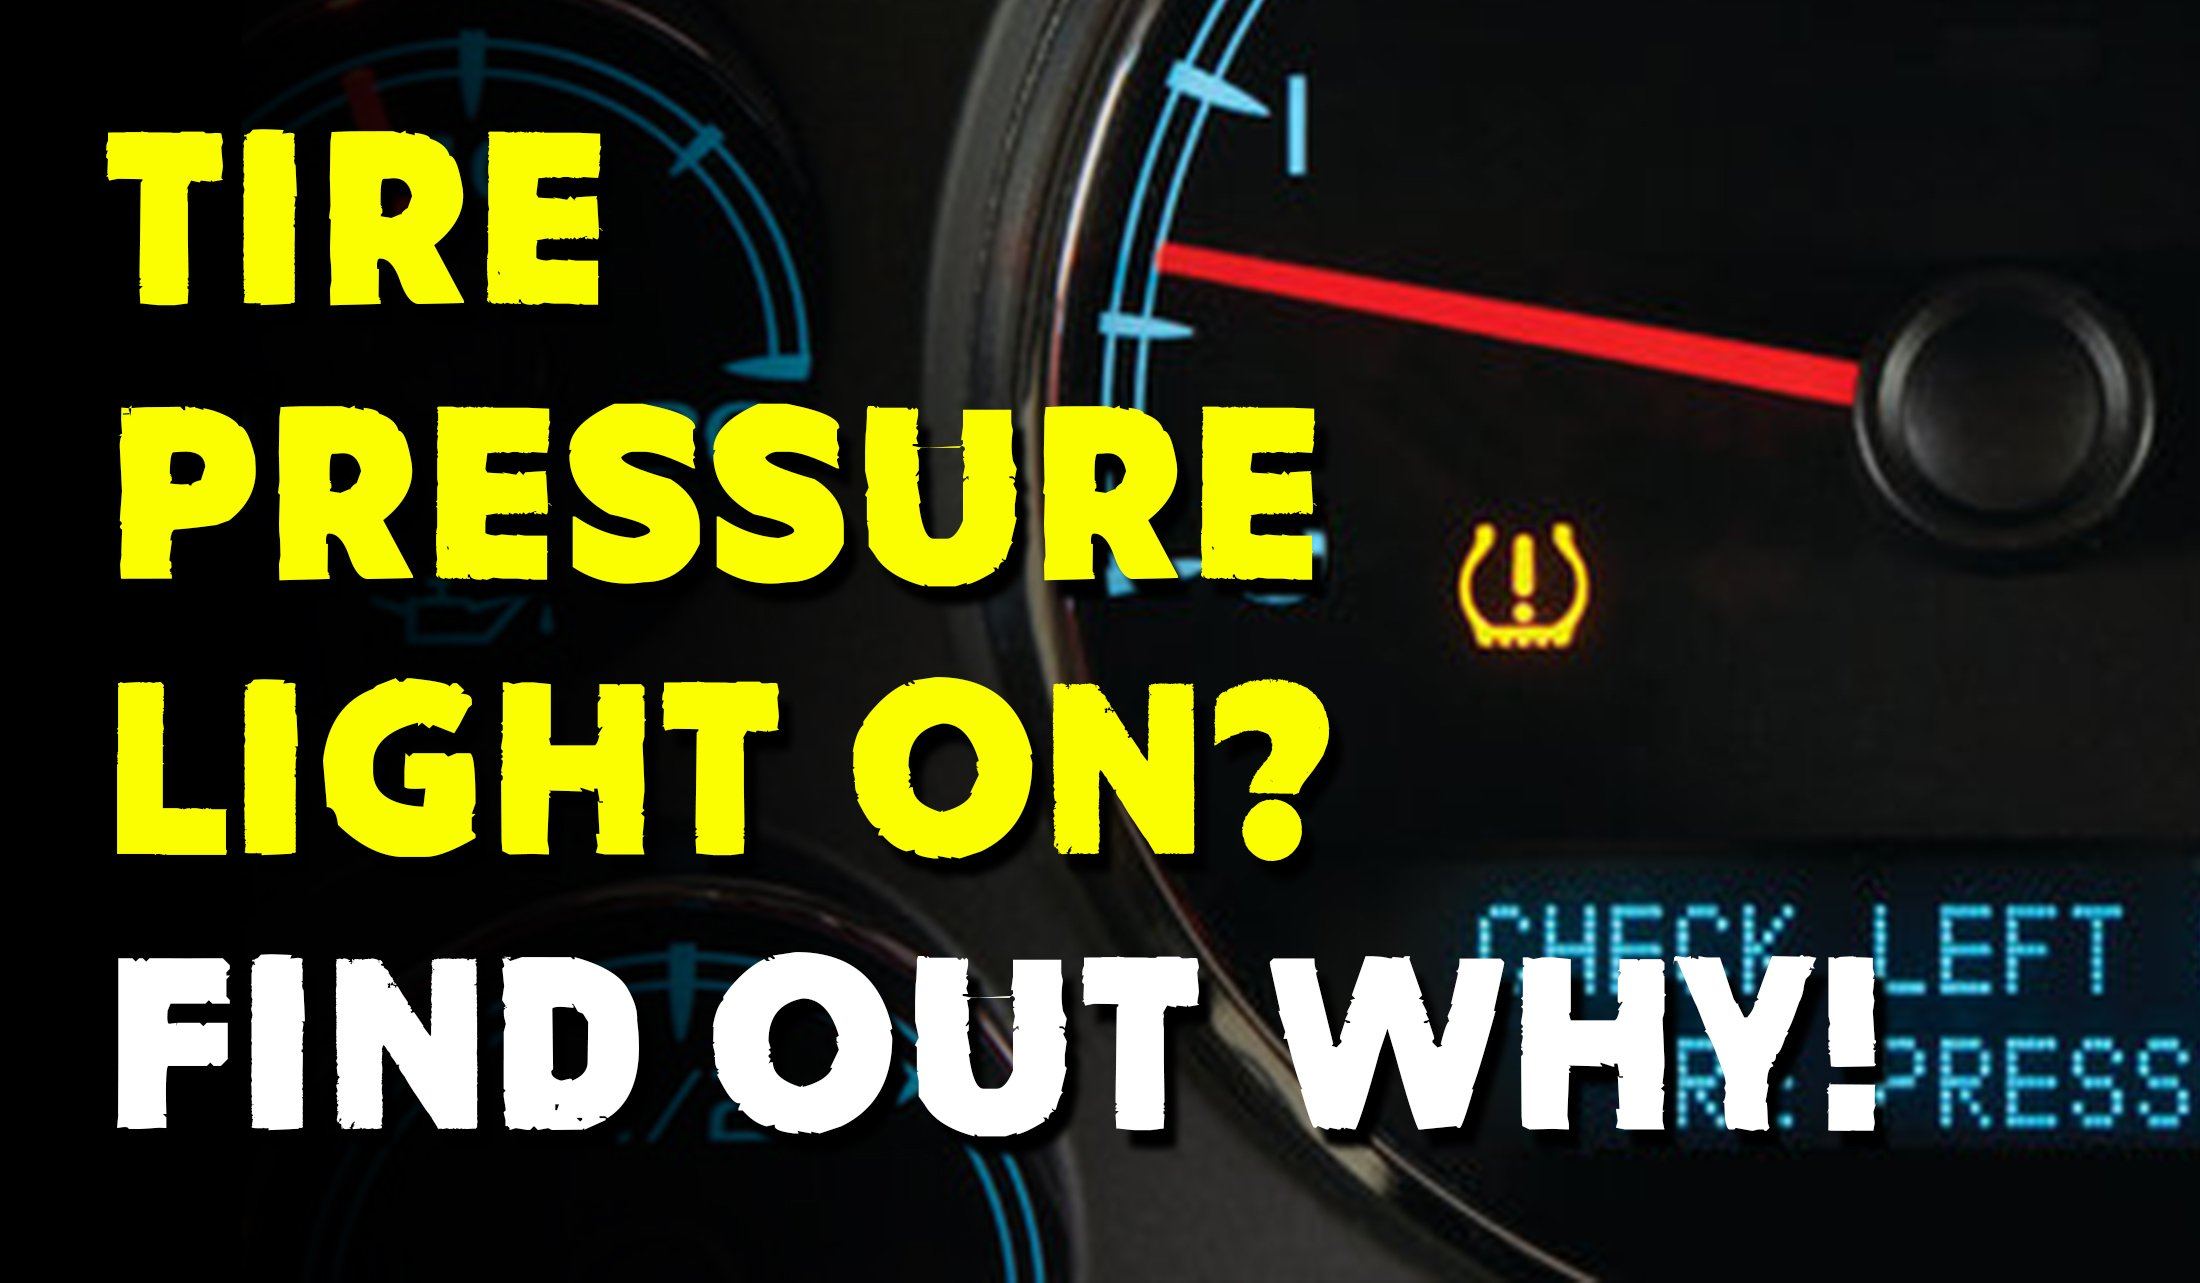 Tire Pressure Light On? Find out why!